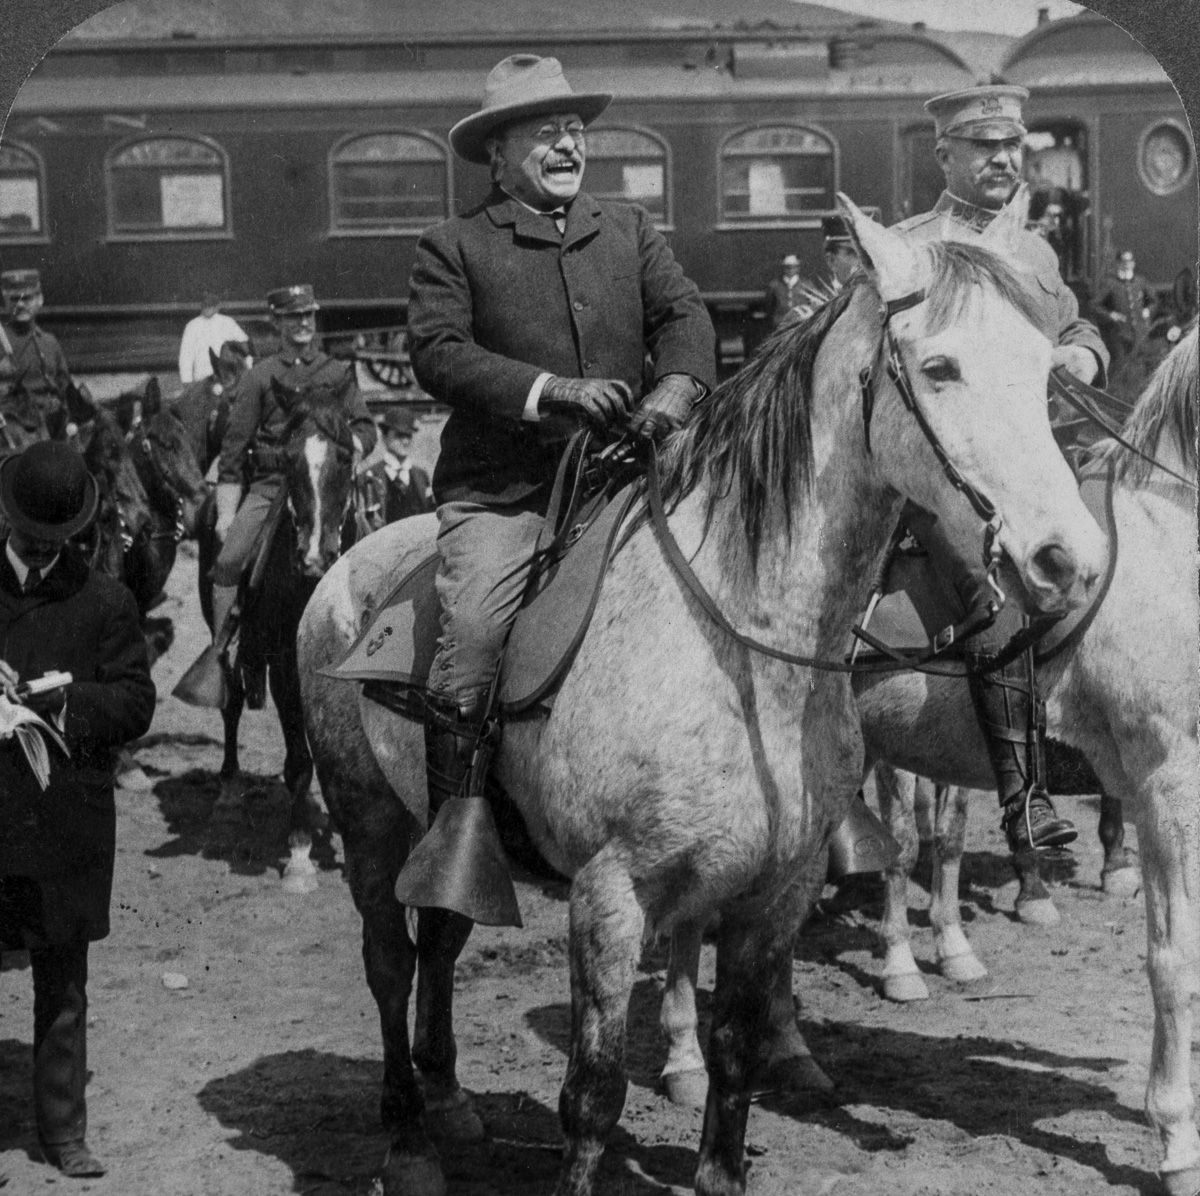 Grainy photo of Theodore Roosevelt riding a horse surrounded by a crowd at Yellowstone National Park.